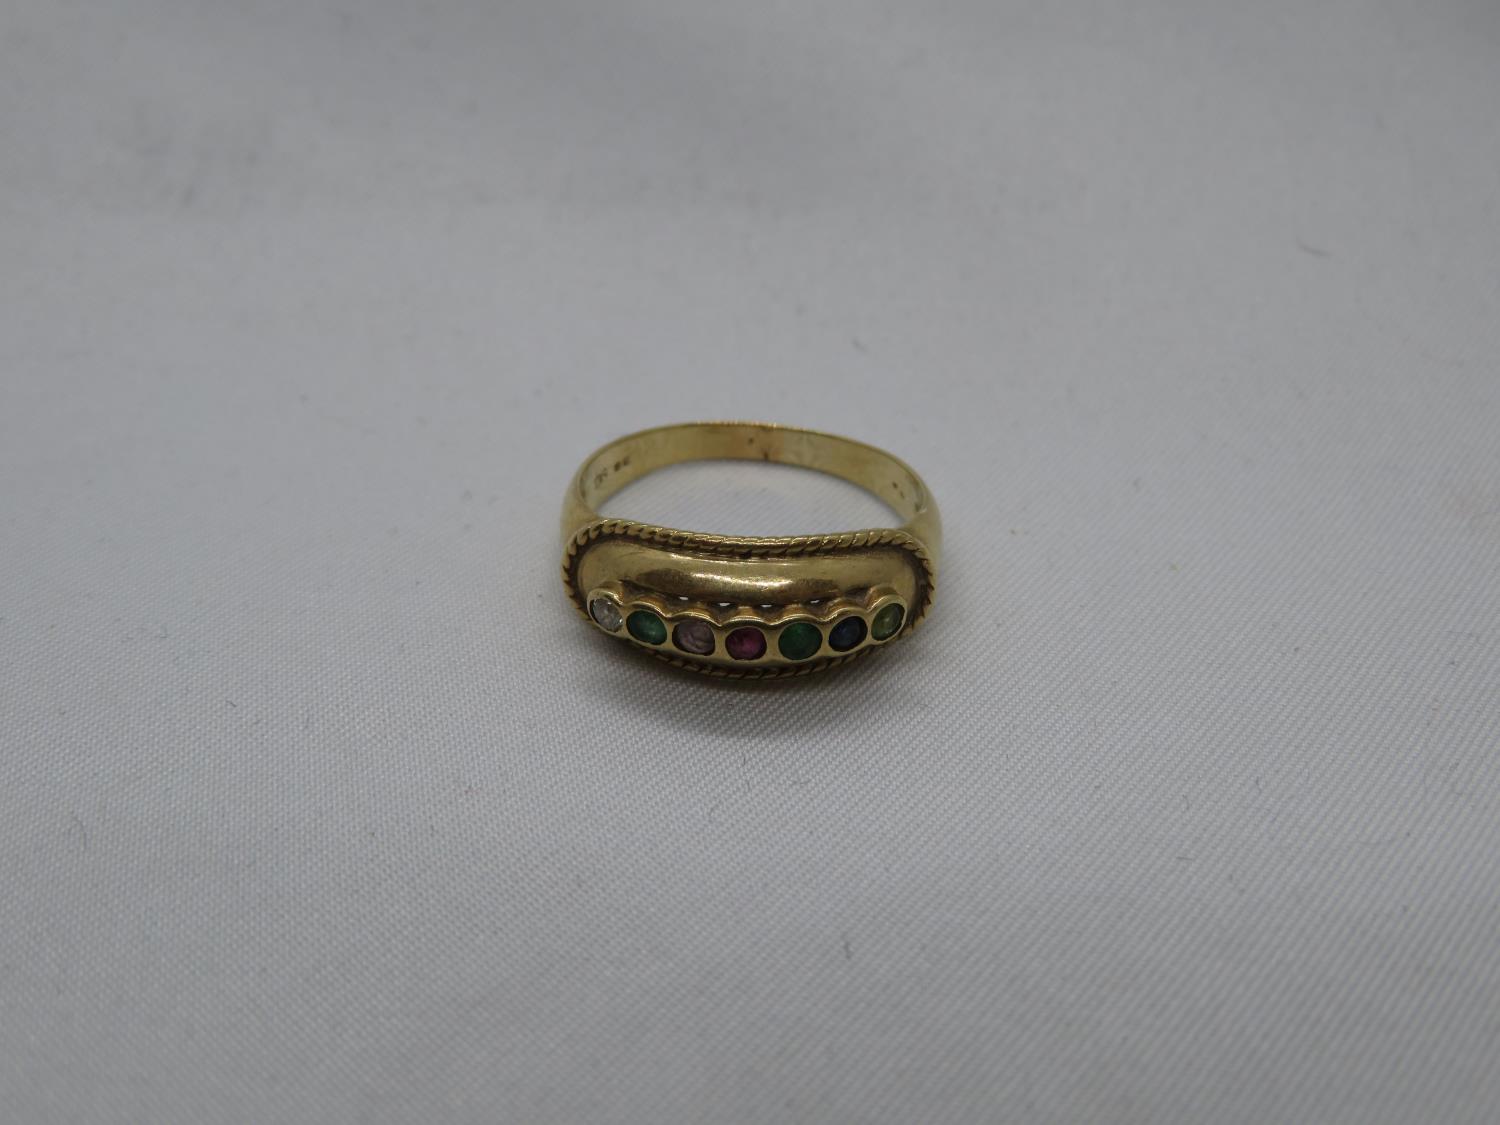 9ct gold ring with multi coloured stone stones 2.7g size Q - Image 2 of 3